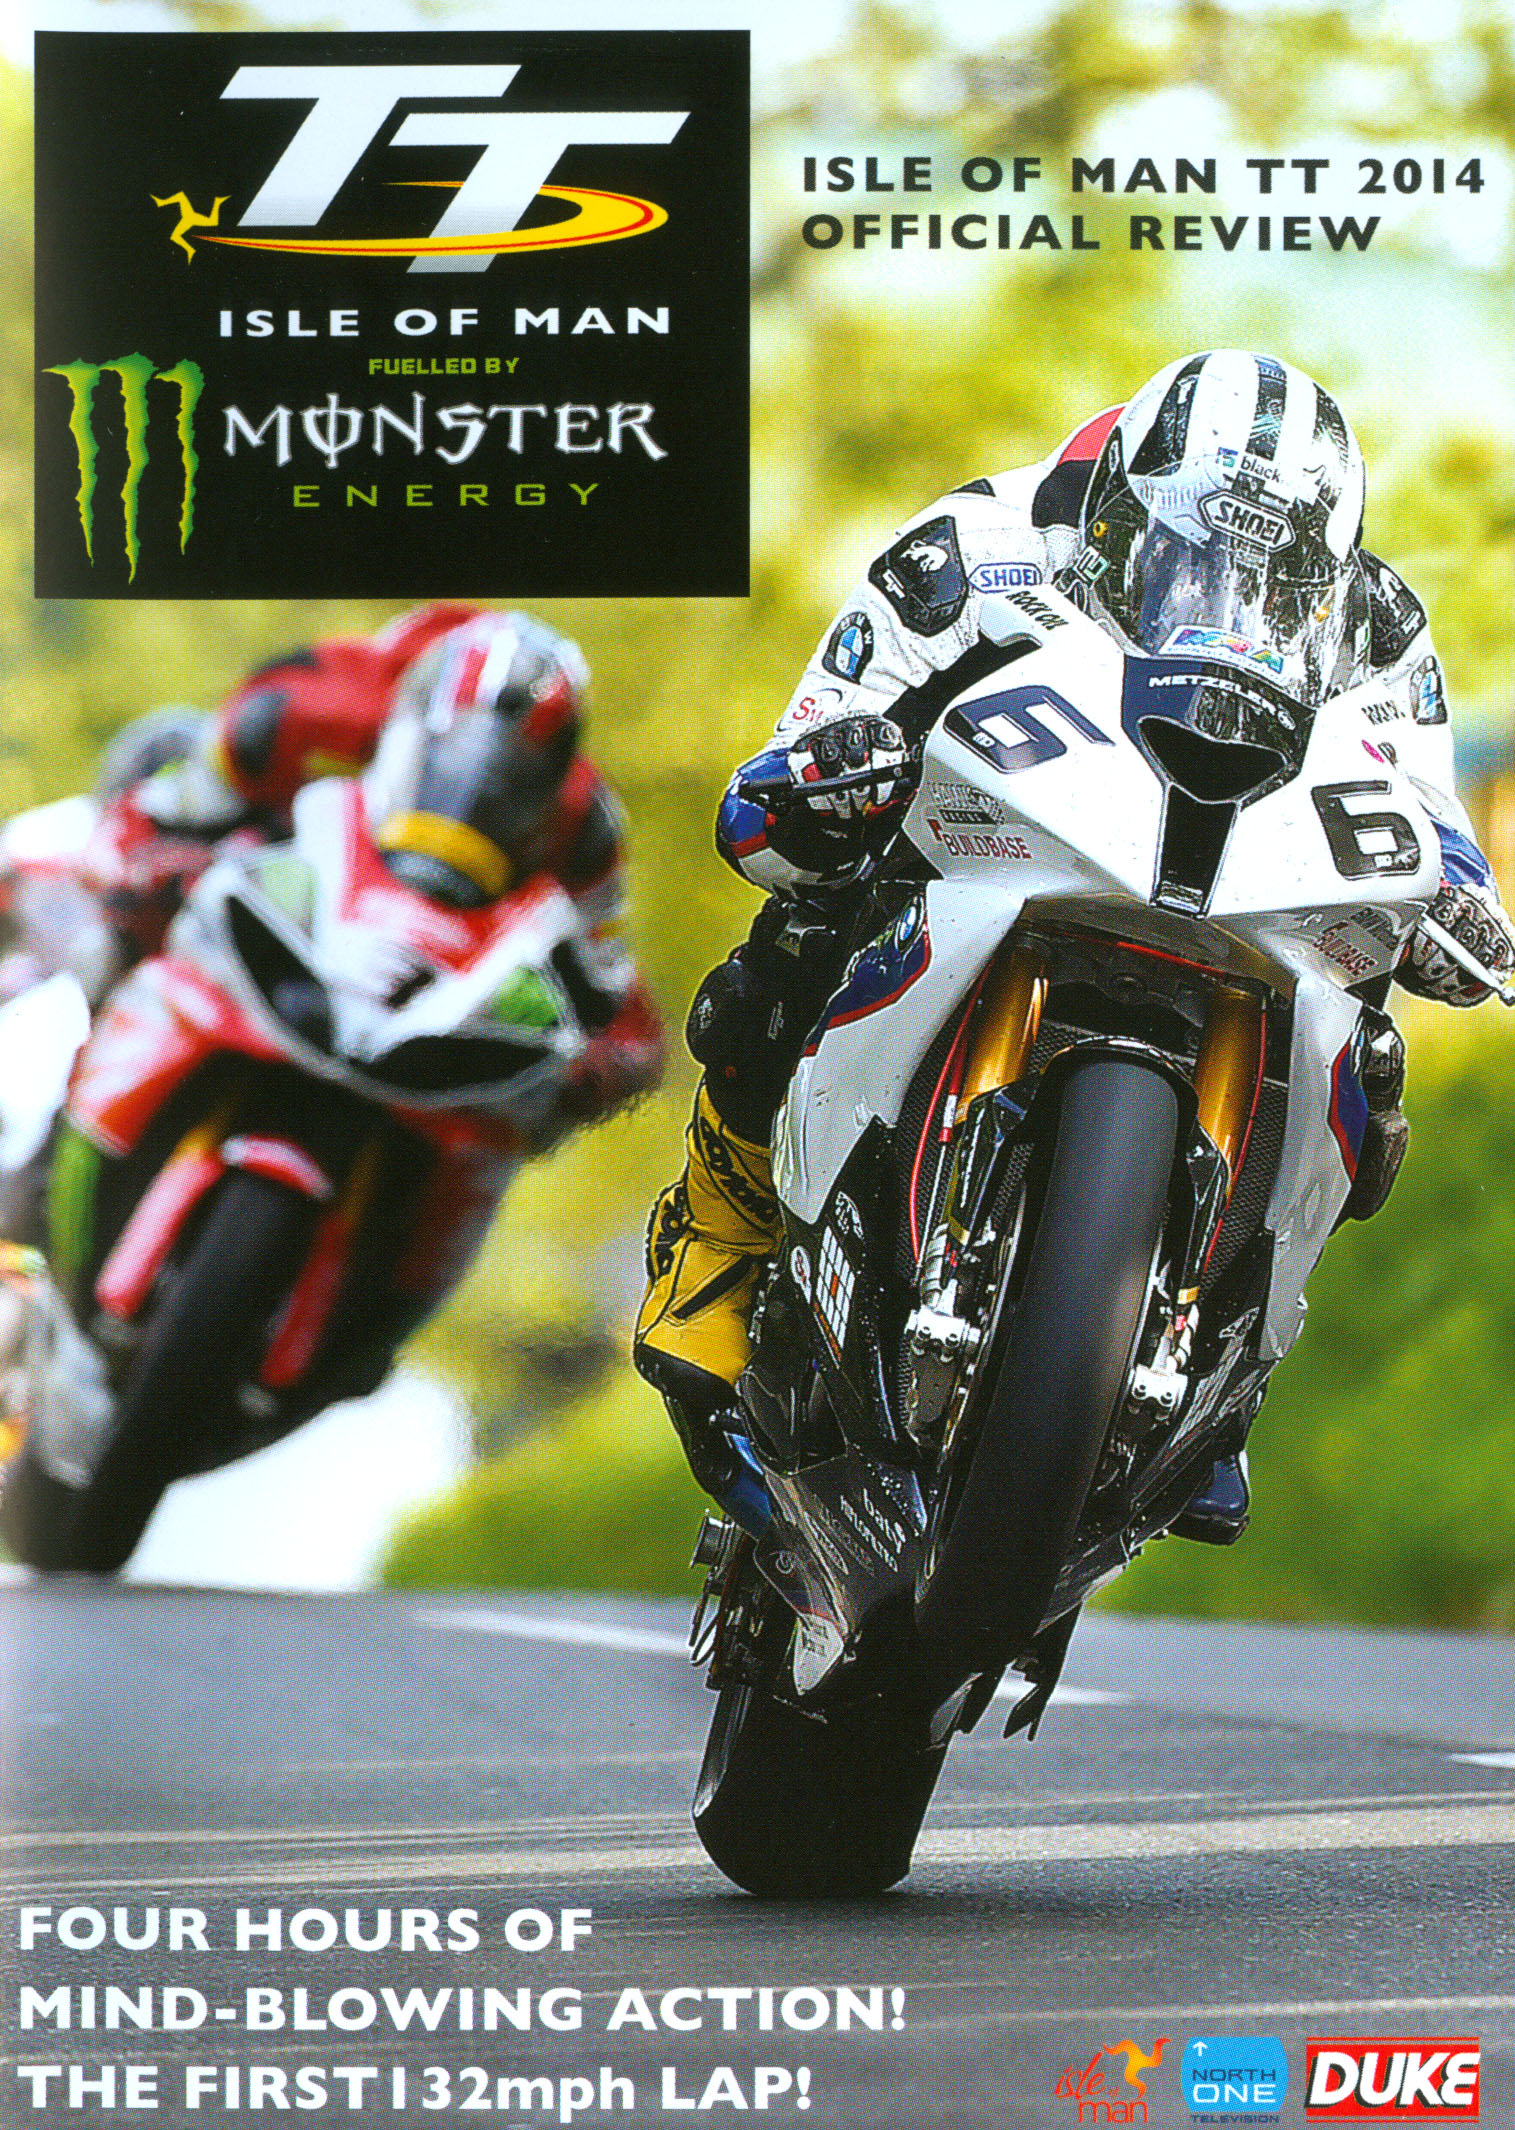 Best Buy: Isle of Man TT 2014 Official Review [DVD] [2014]